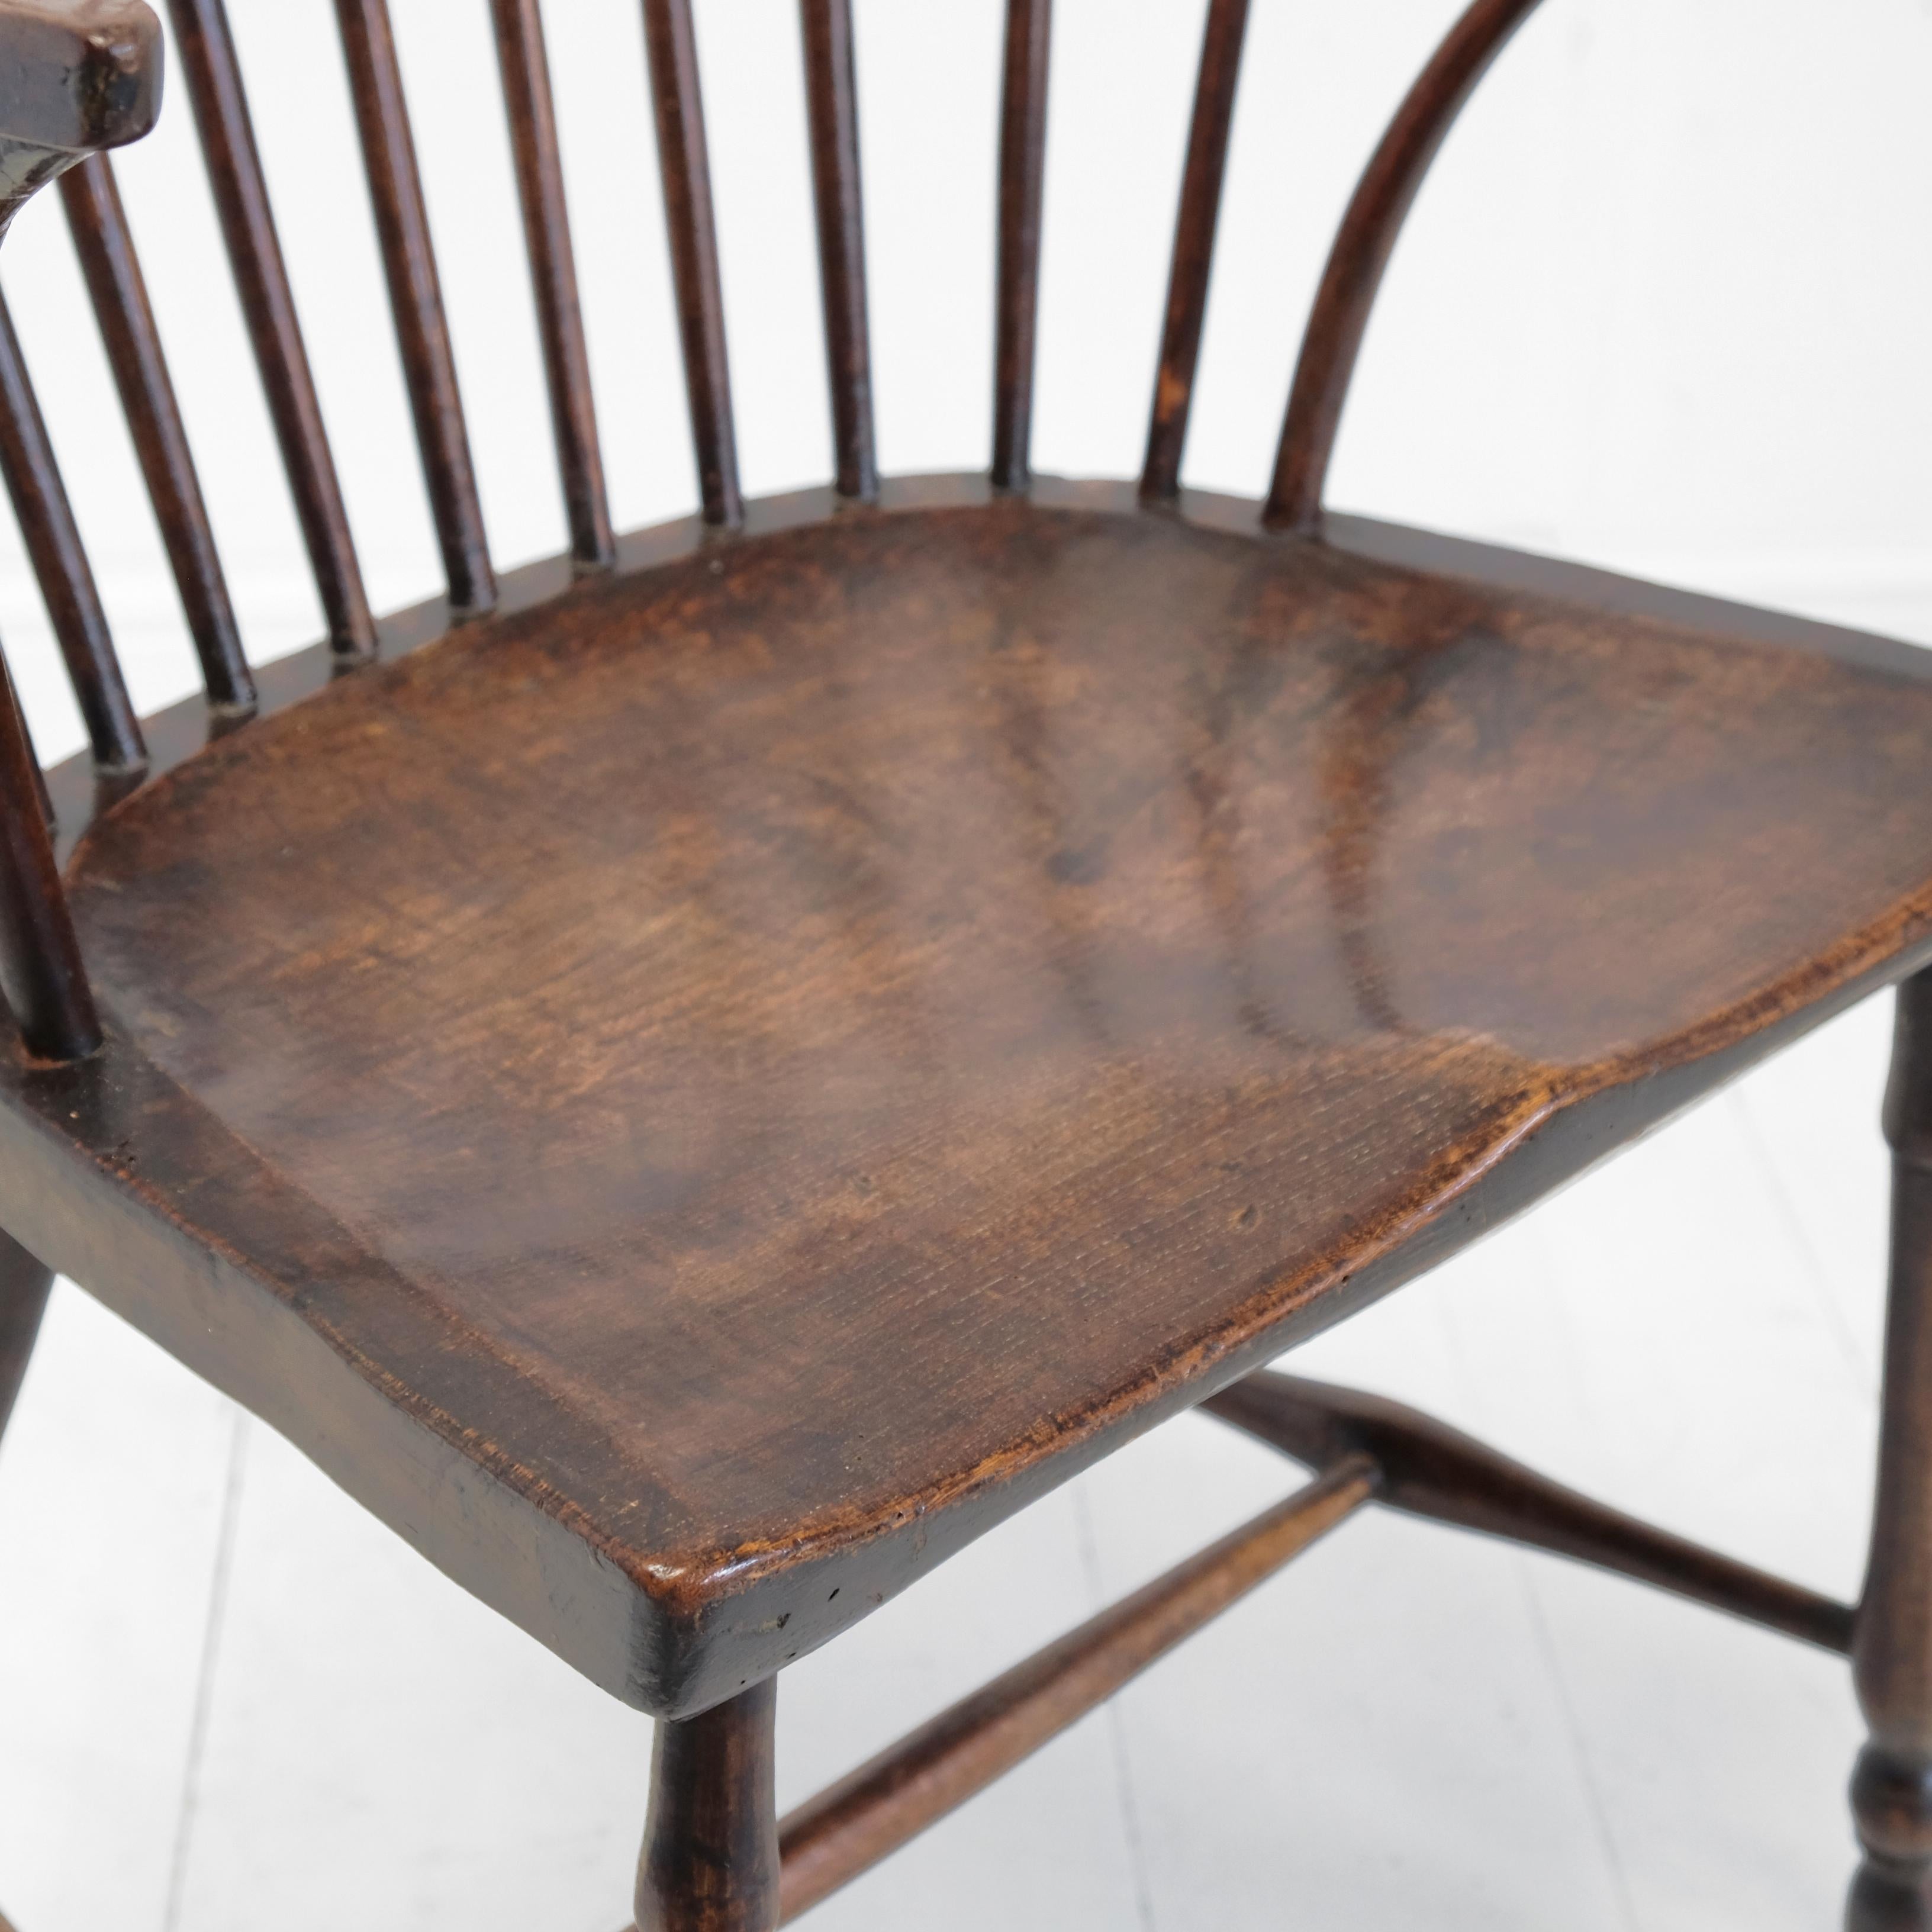 19th Century English Comb Back Windsor Chair, Elm and Beech, 1800, West Country, Vernacular